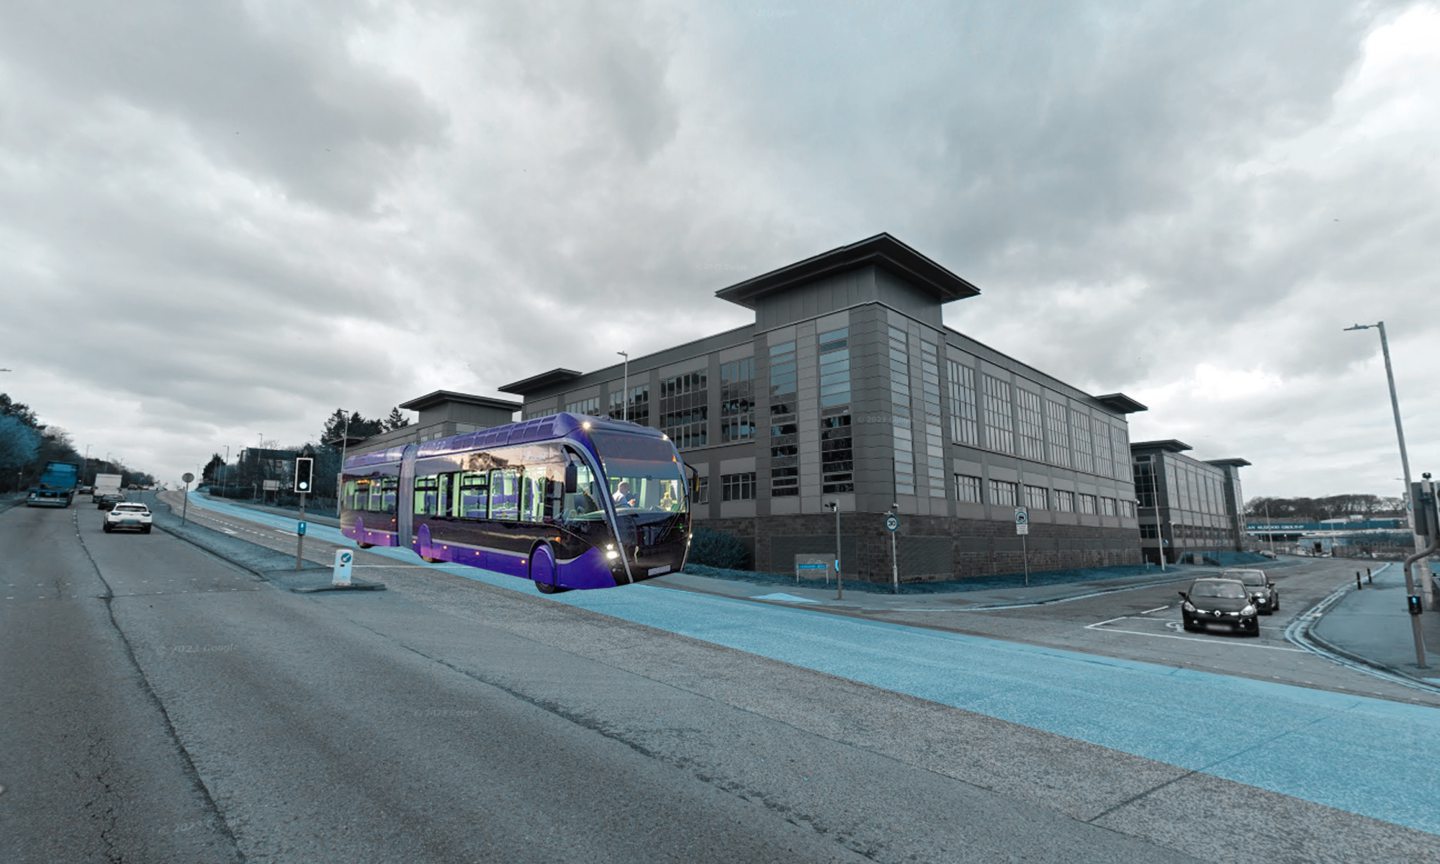 An artist impression of what the Aberdeen Rapid Transit route could look like on Wellington Road